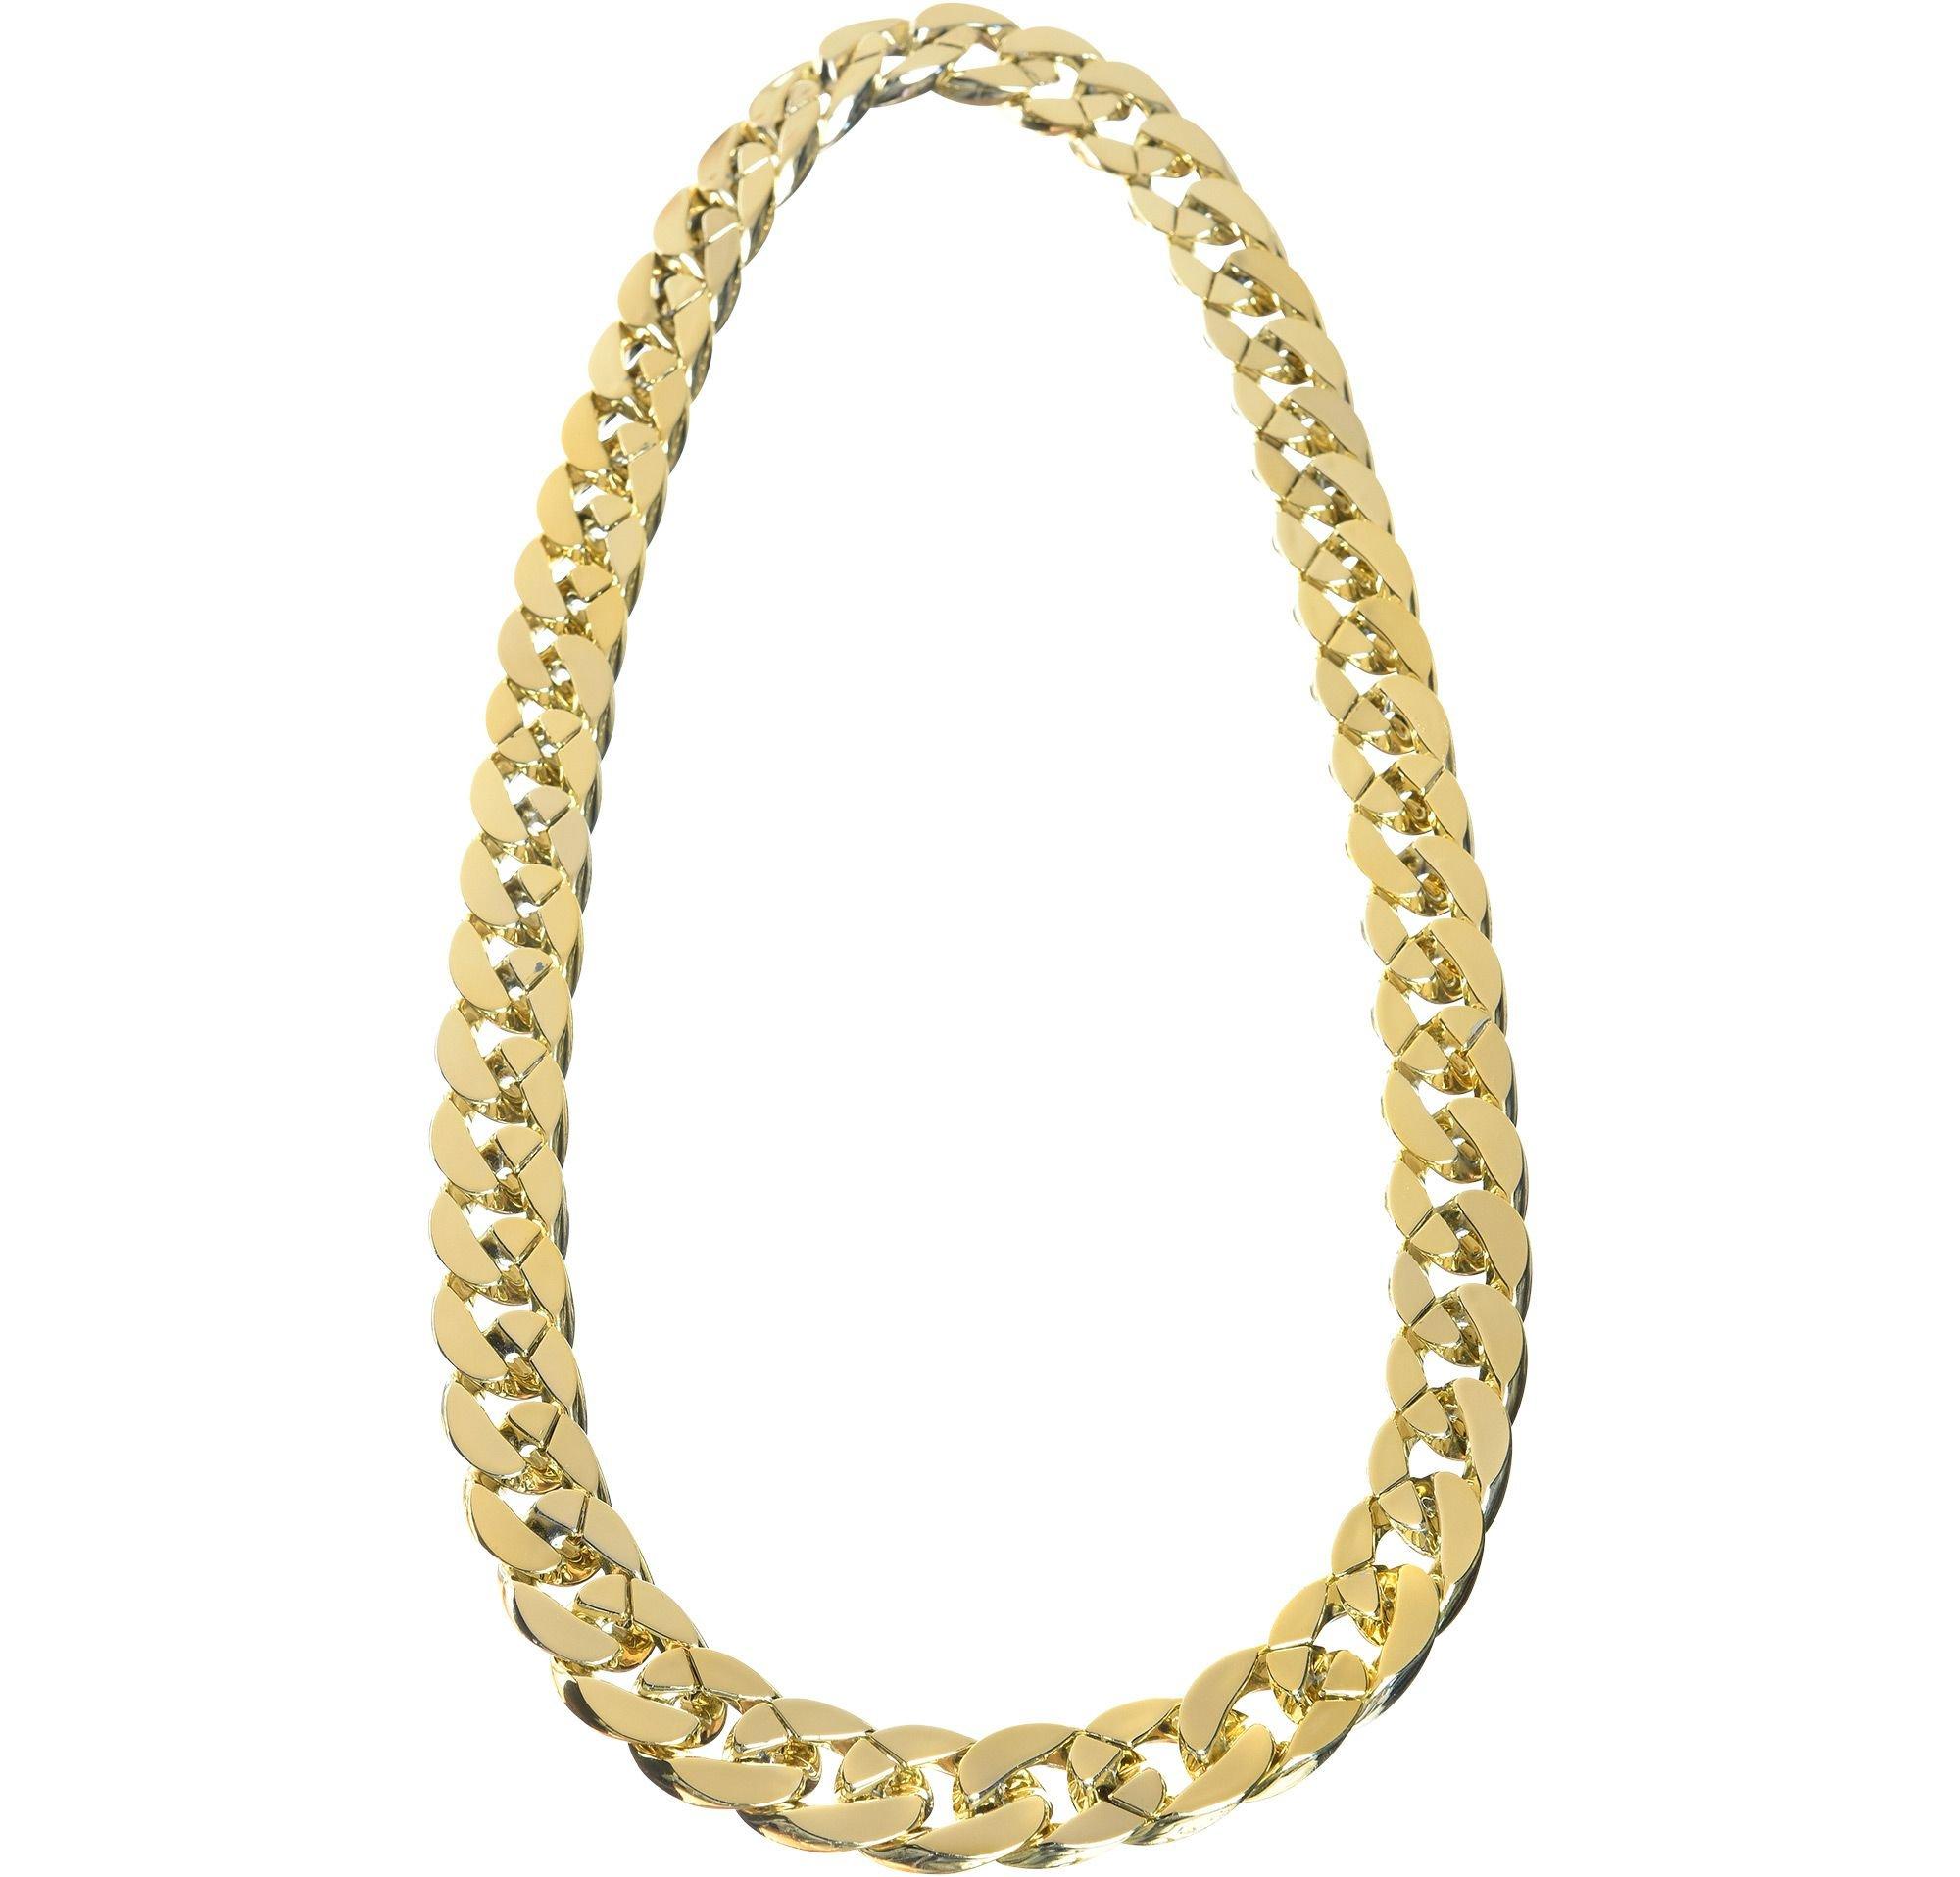 Big Links Gold Chain Necklace